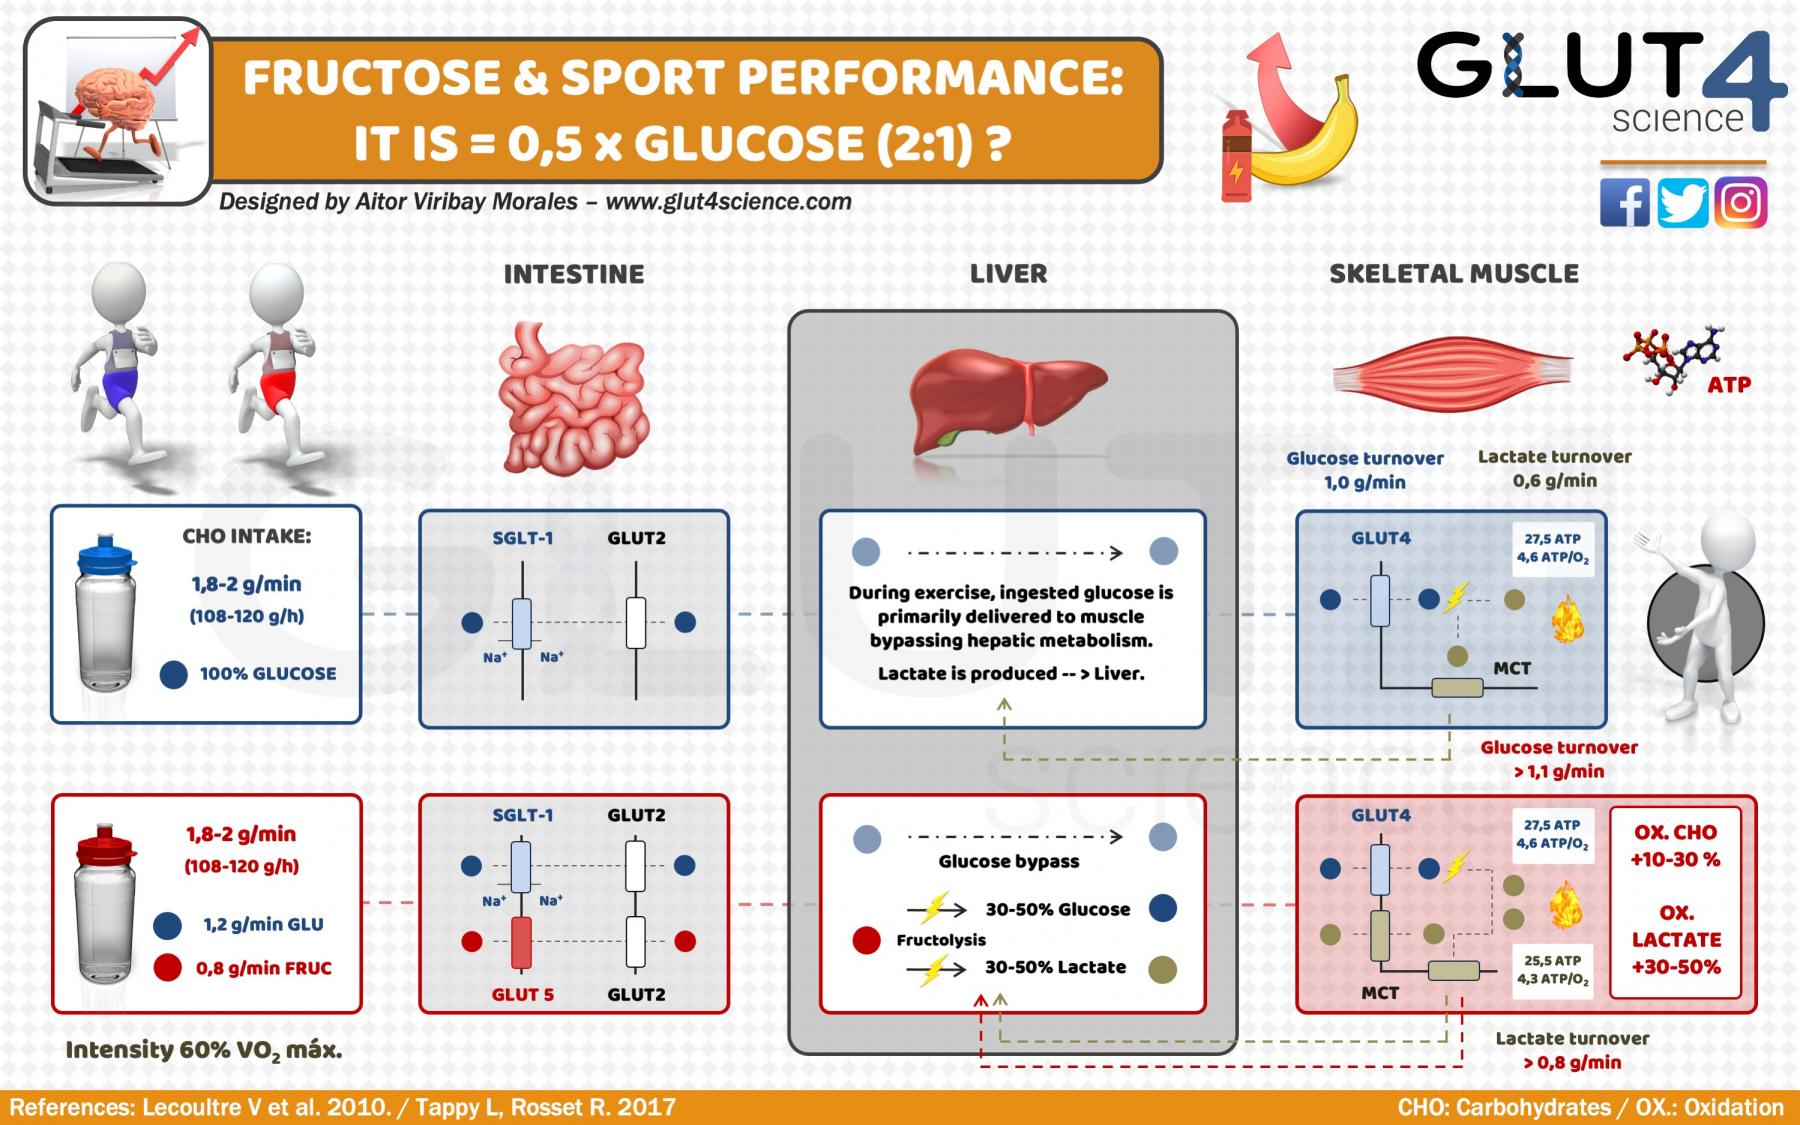 Fructose and sport performance: More than 0,5 x glucose (ratio 2:1)